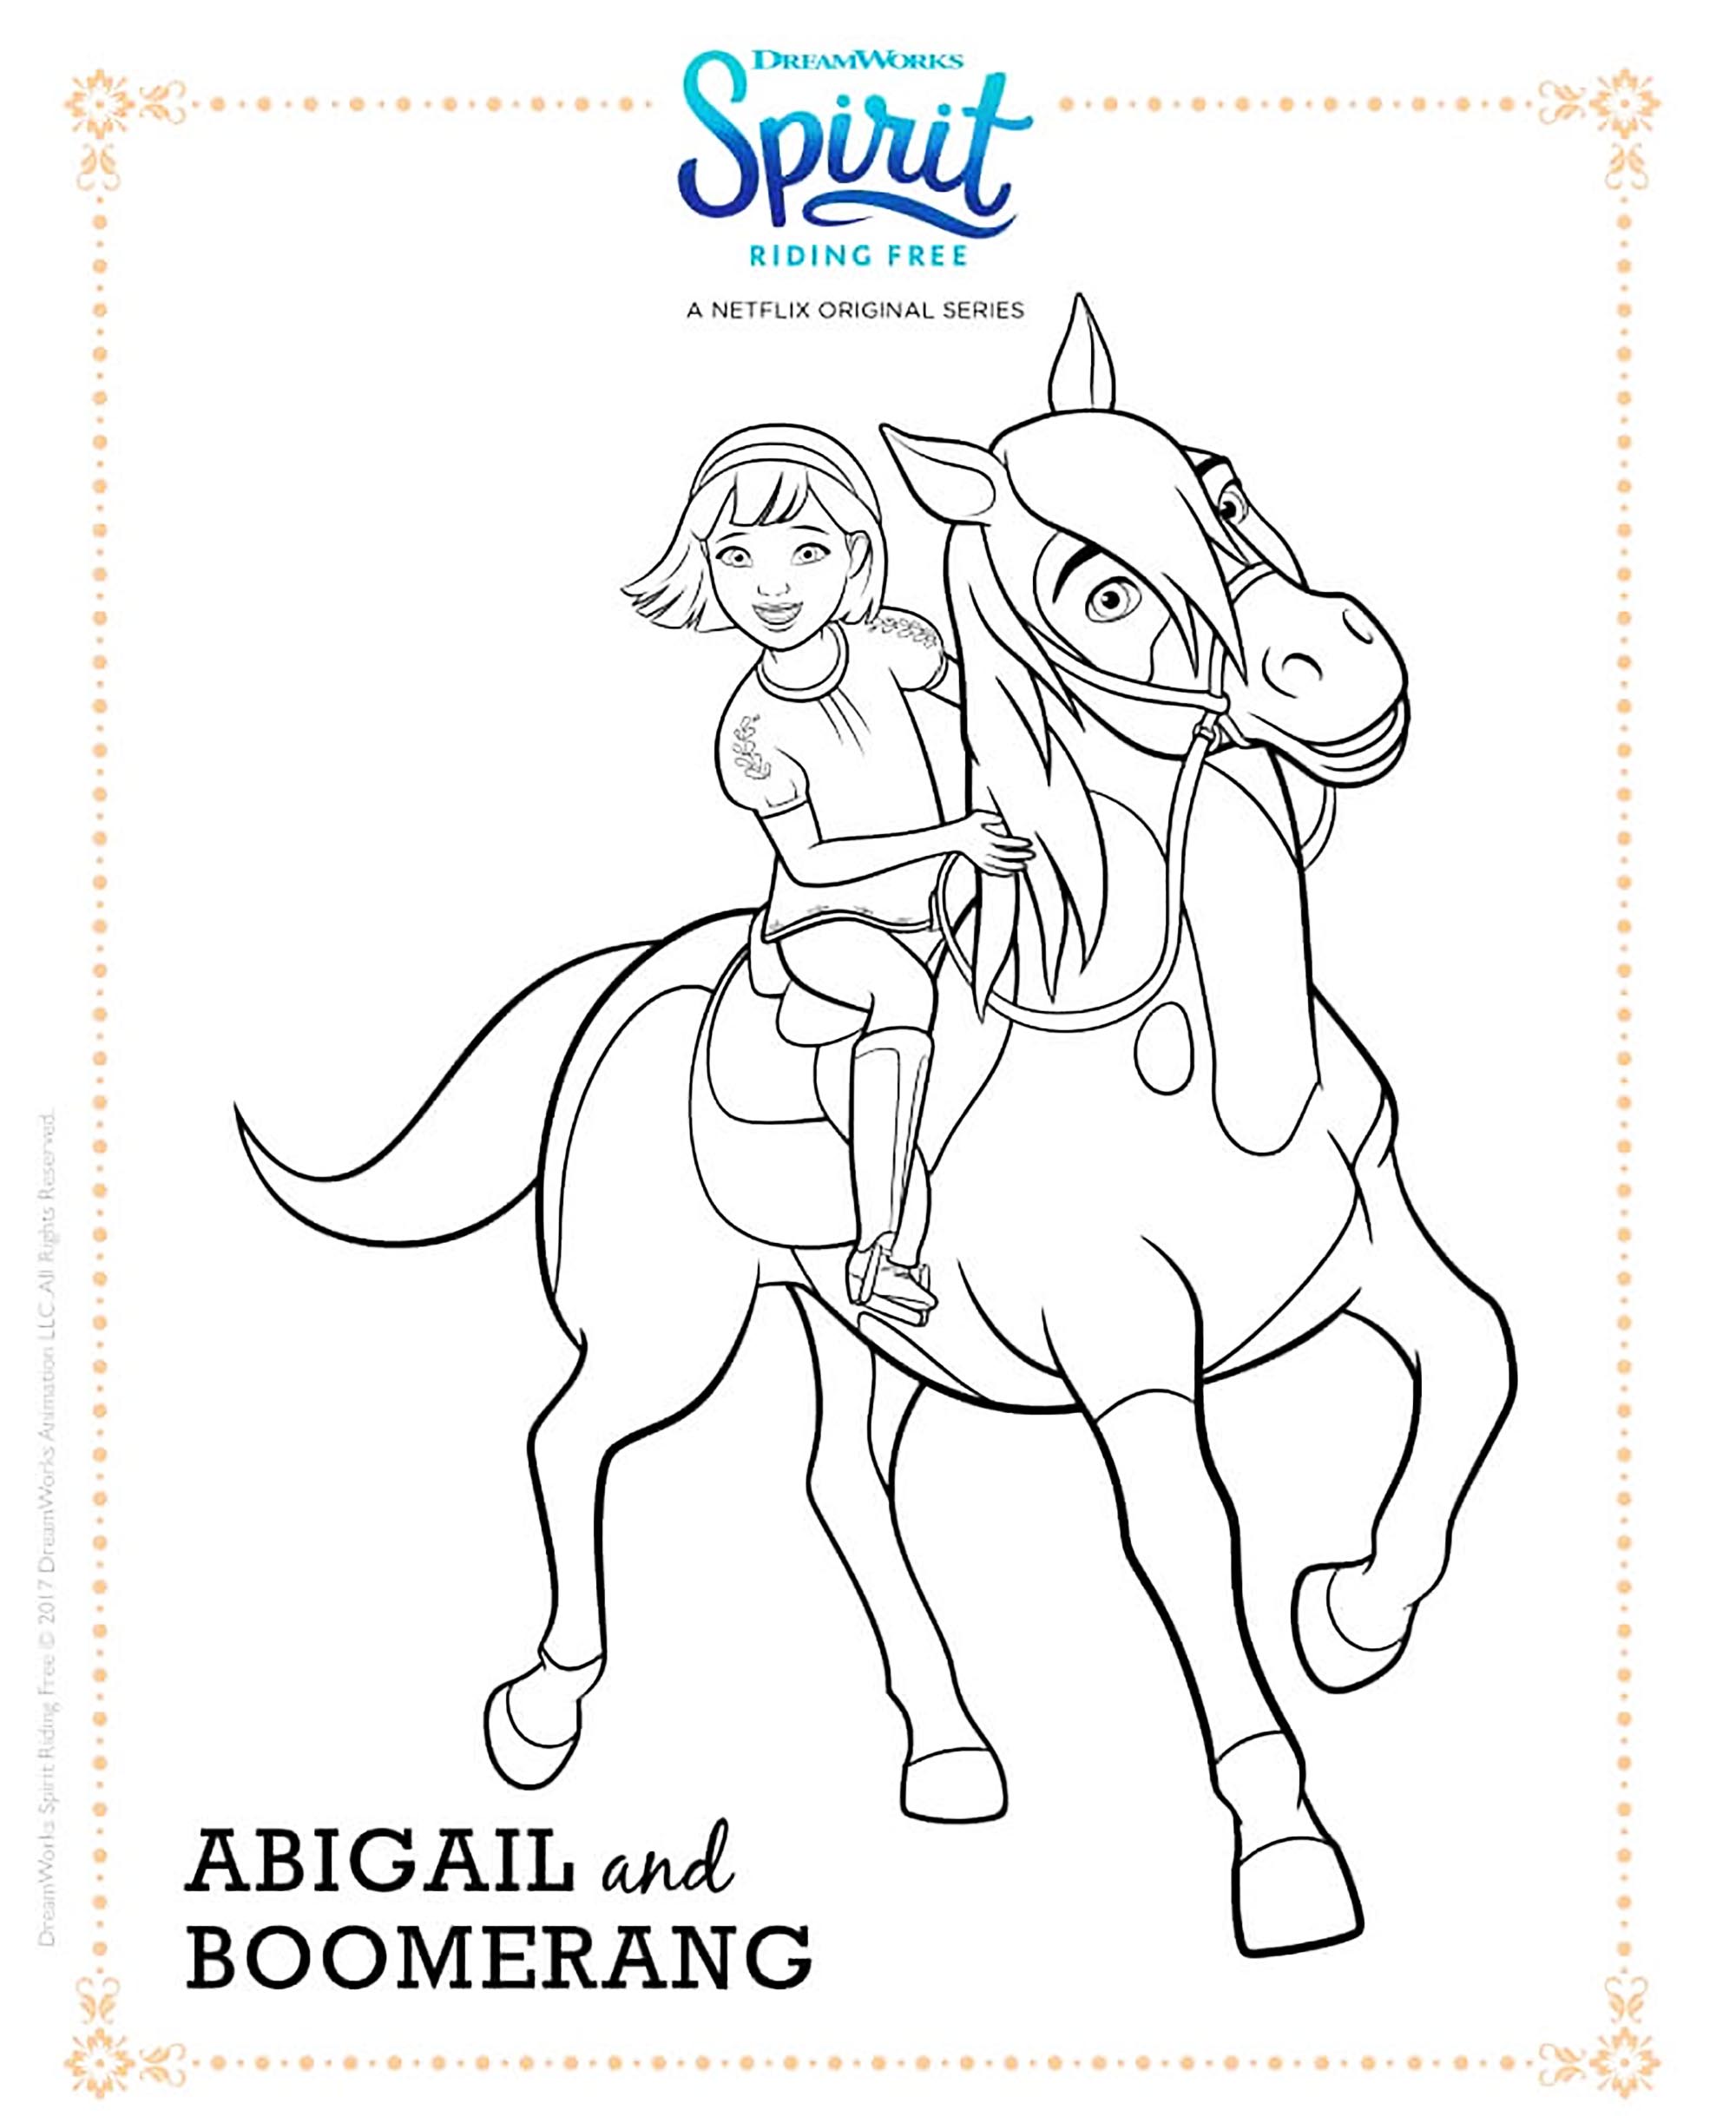 Funny Spirit coloring page for children